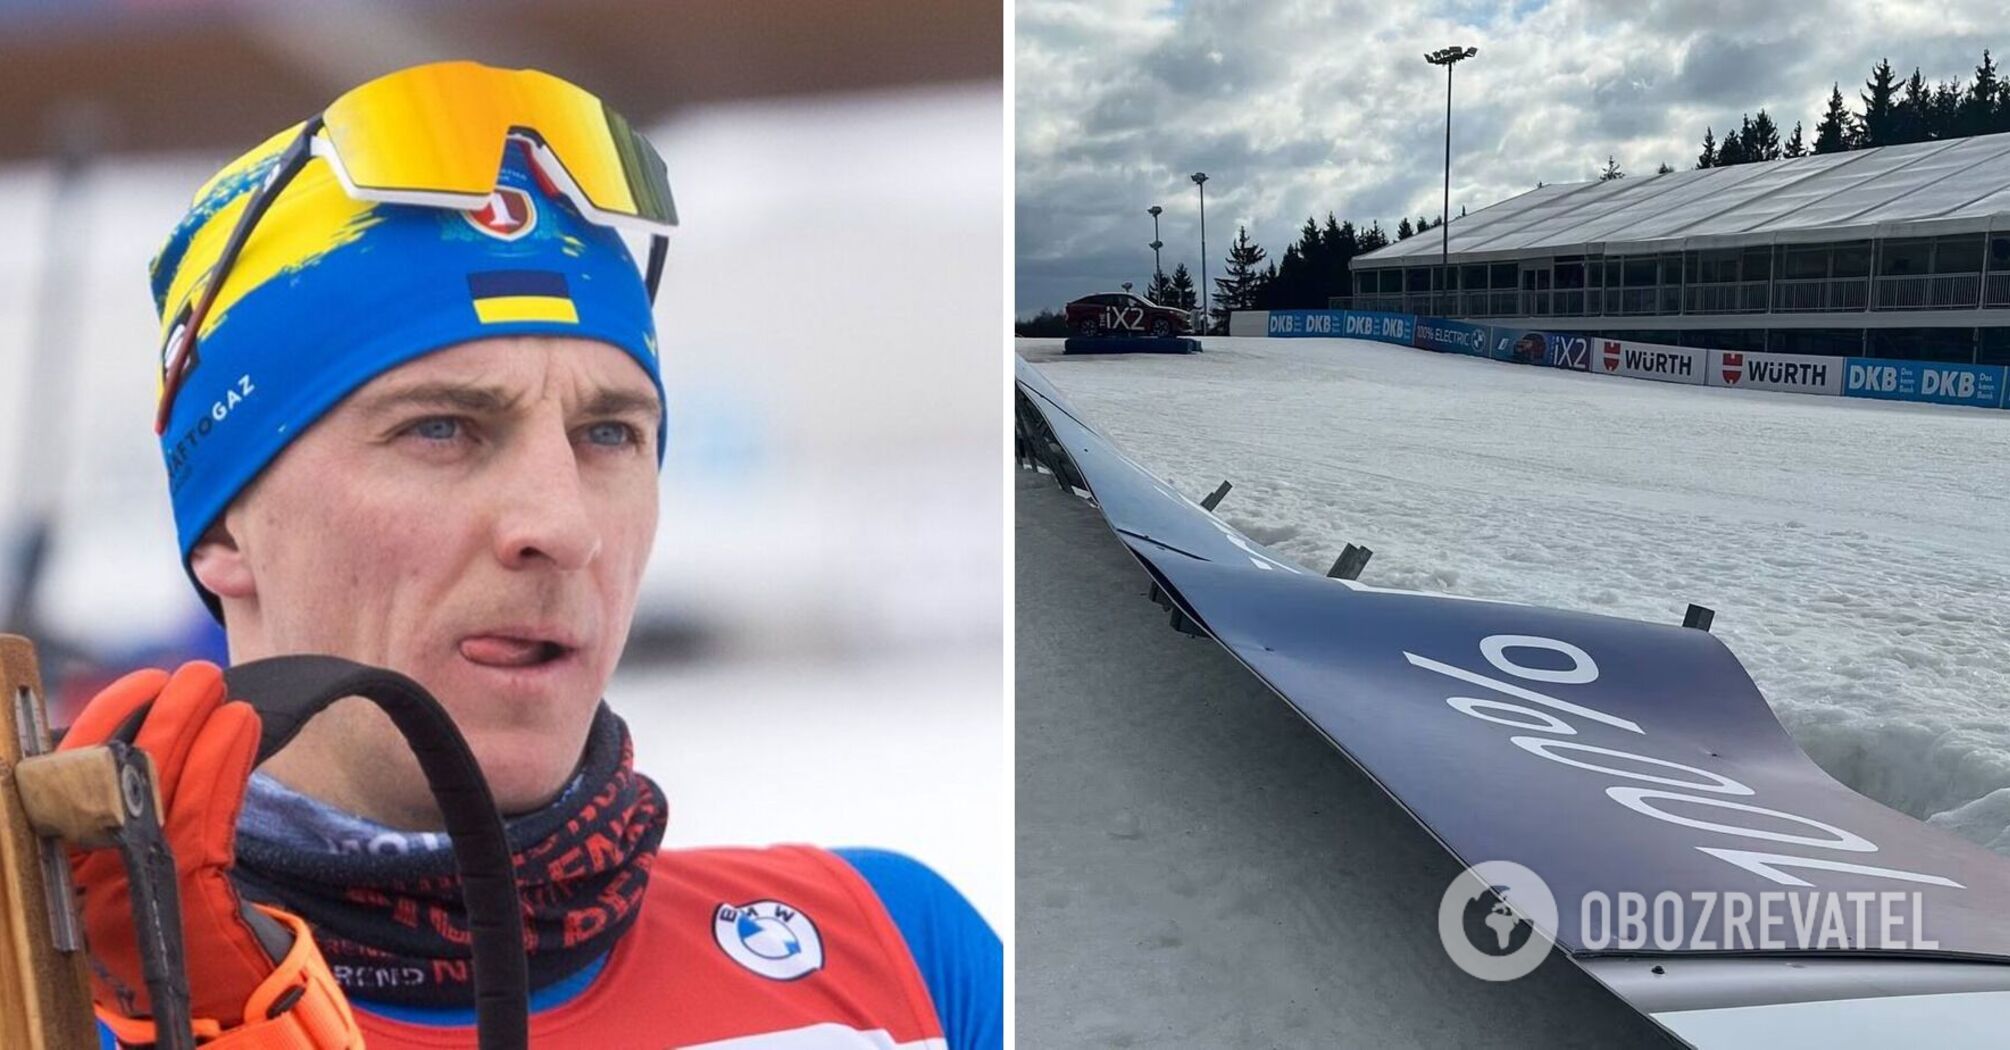 'There have never been such conditions before': the leader of the Ukrainian biathlon team tells about the horror at the World Championships